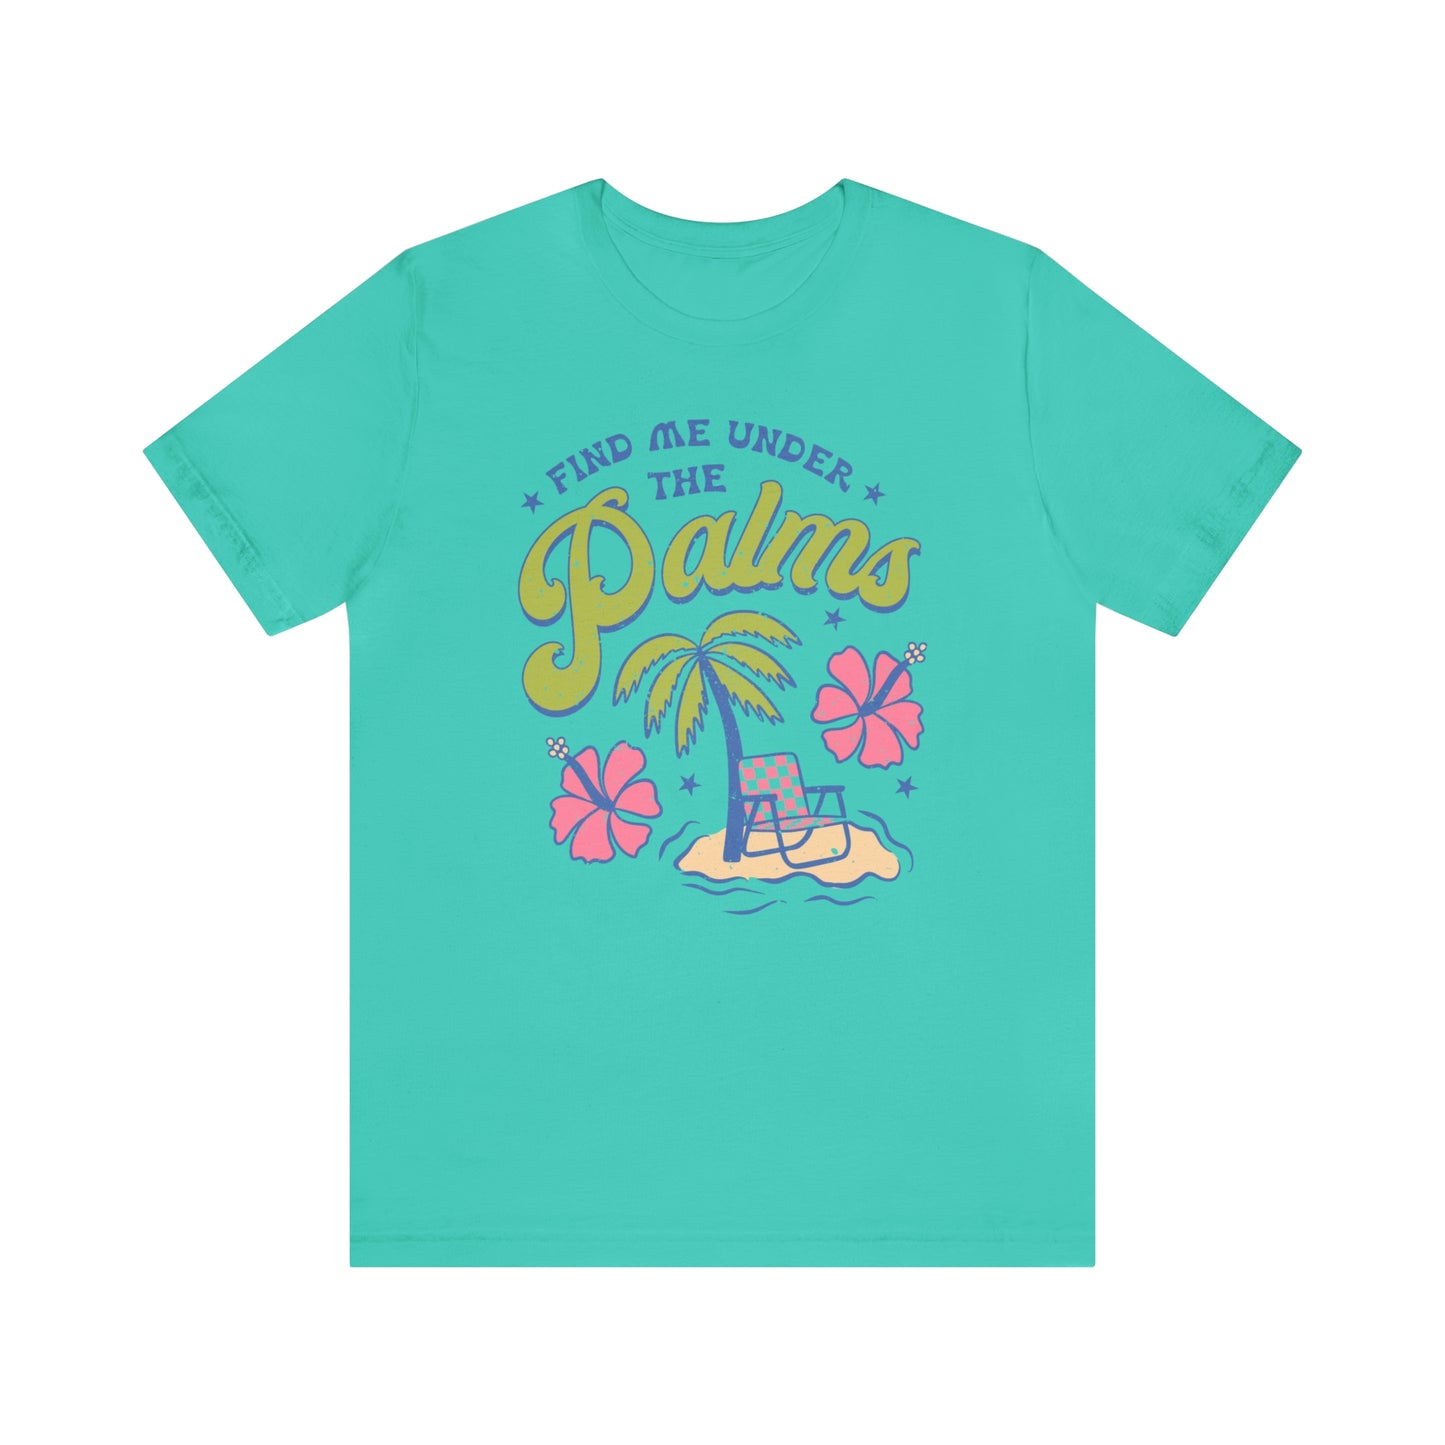 "Find Me Under the Palms" Bella Canvas Short Sleeve Tee